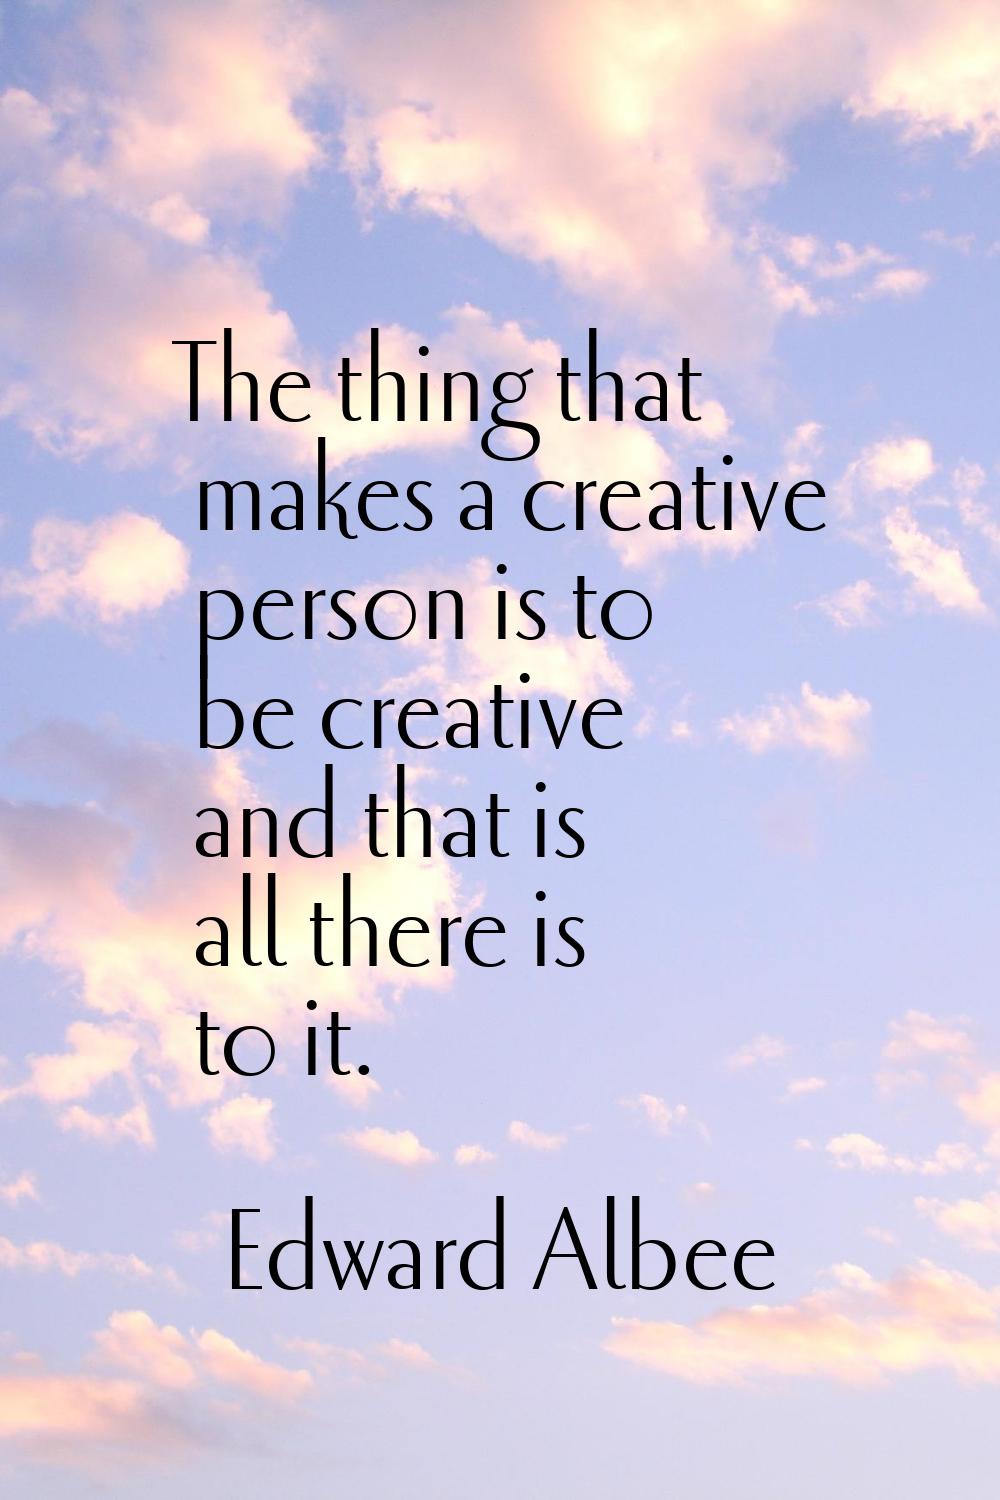 The thing that makes a creative person is to be creative and that is all there is to it.